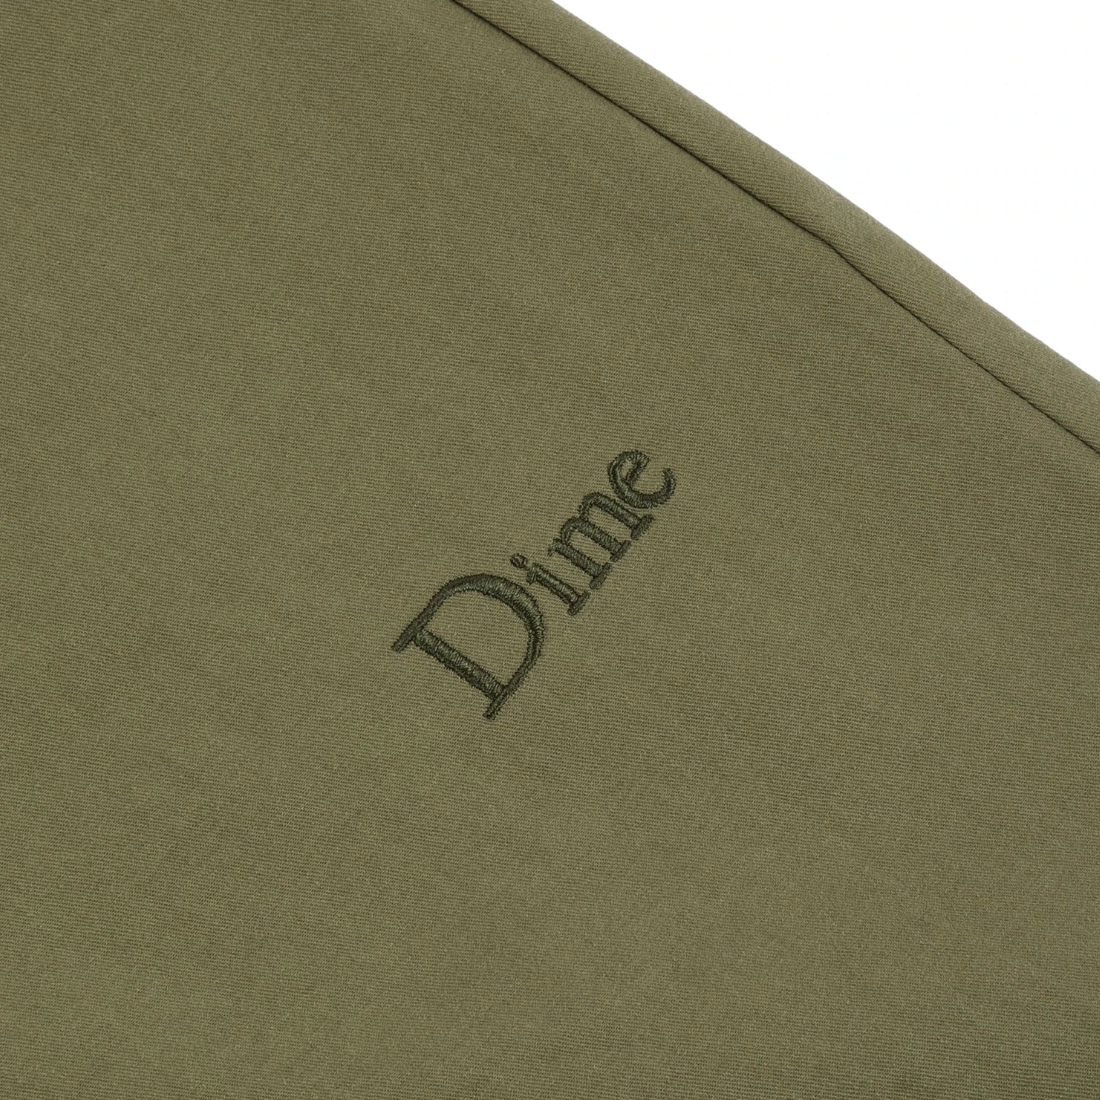 【Dime】Military I Know Pants - Army Green